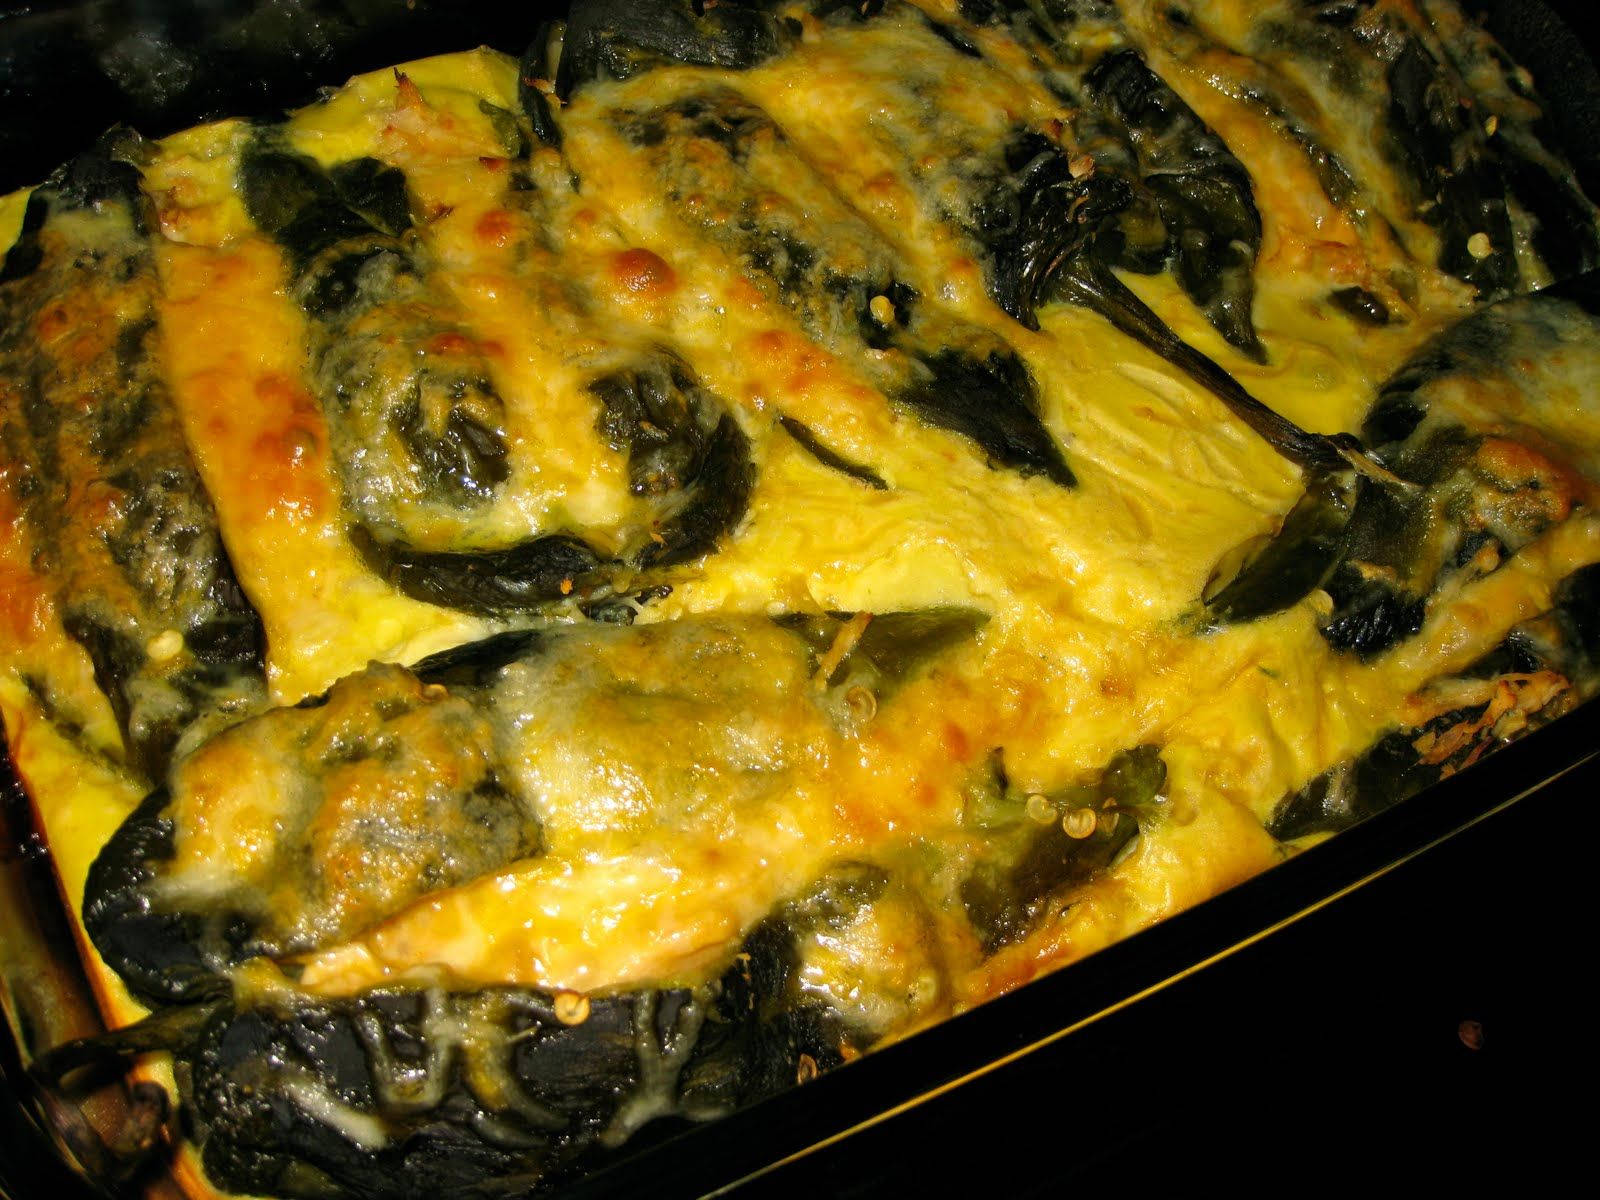 Mexican Cuisine Baked Chili Relleno Close Up Shot Wallpaper